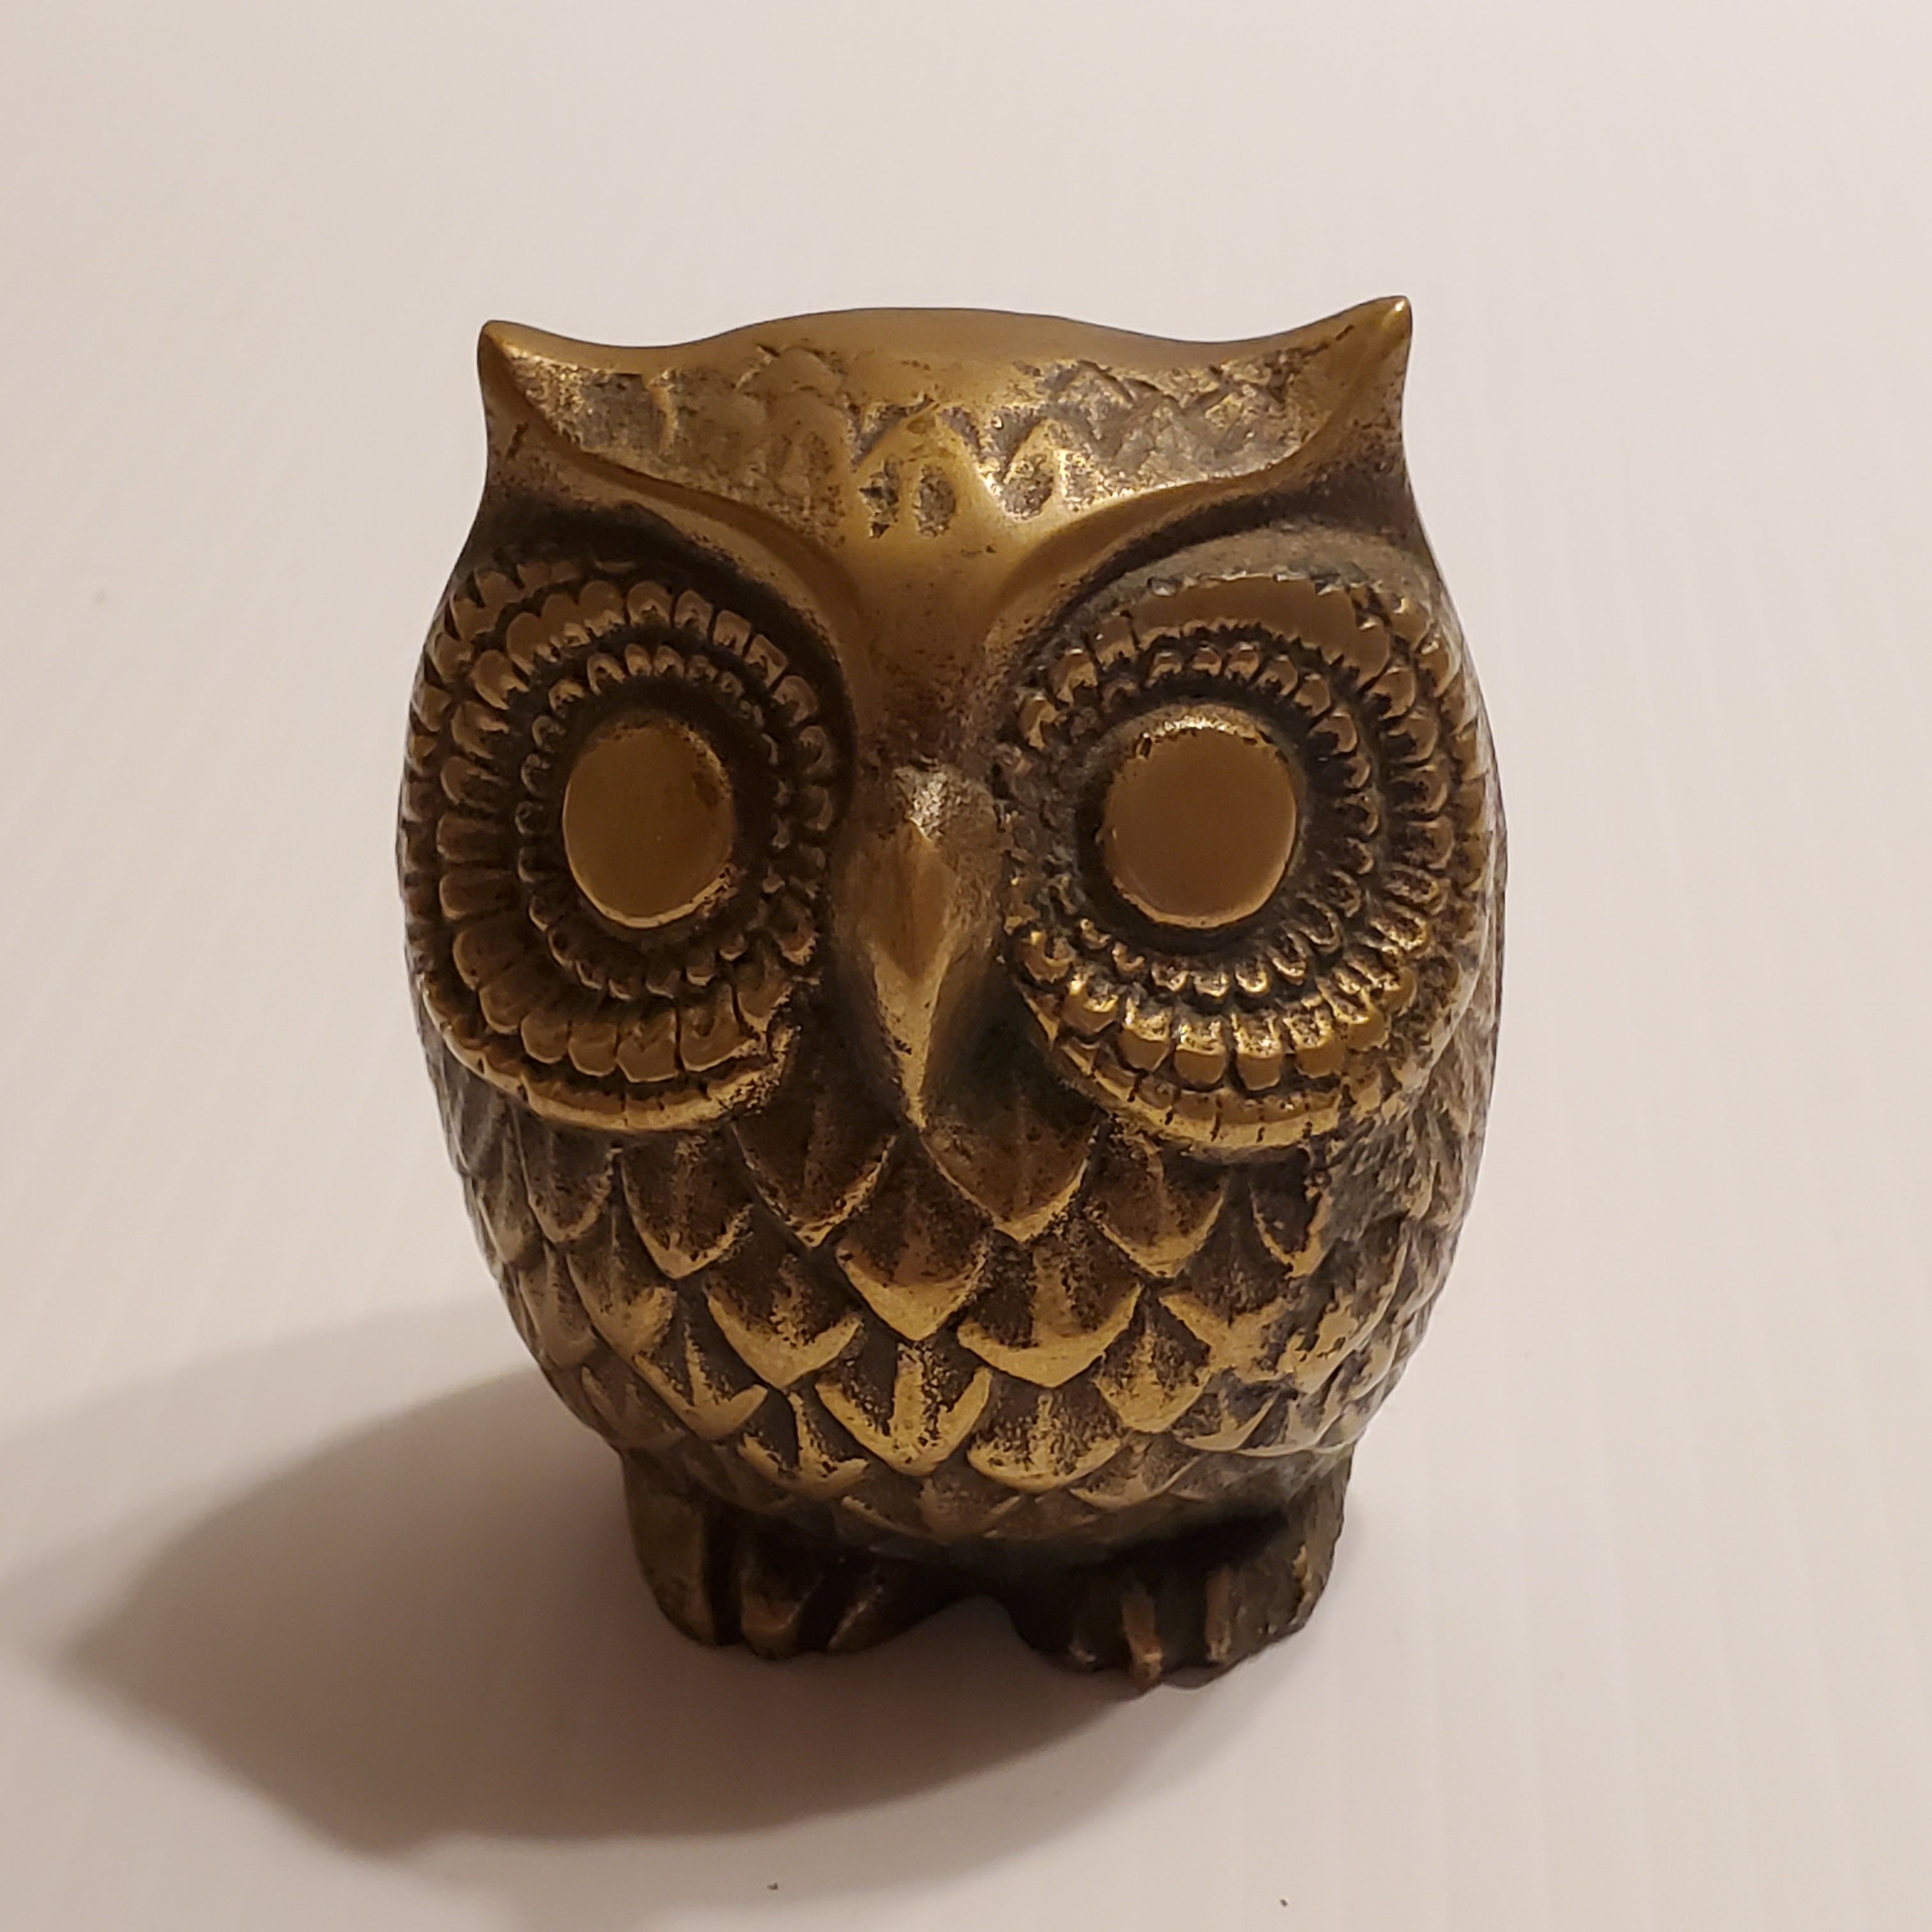 Vintage 70s Brass Owl Statue Metal Figurine Paperweight. Pre-owned, good shape.